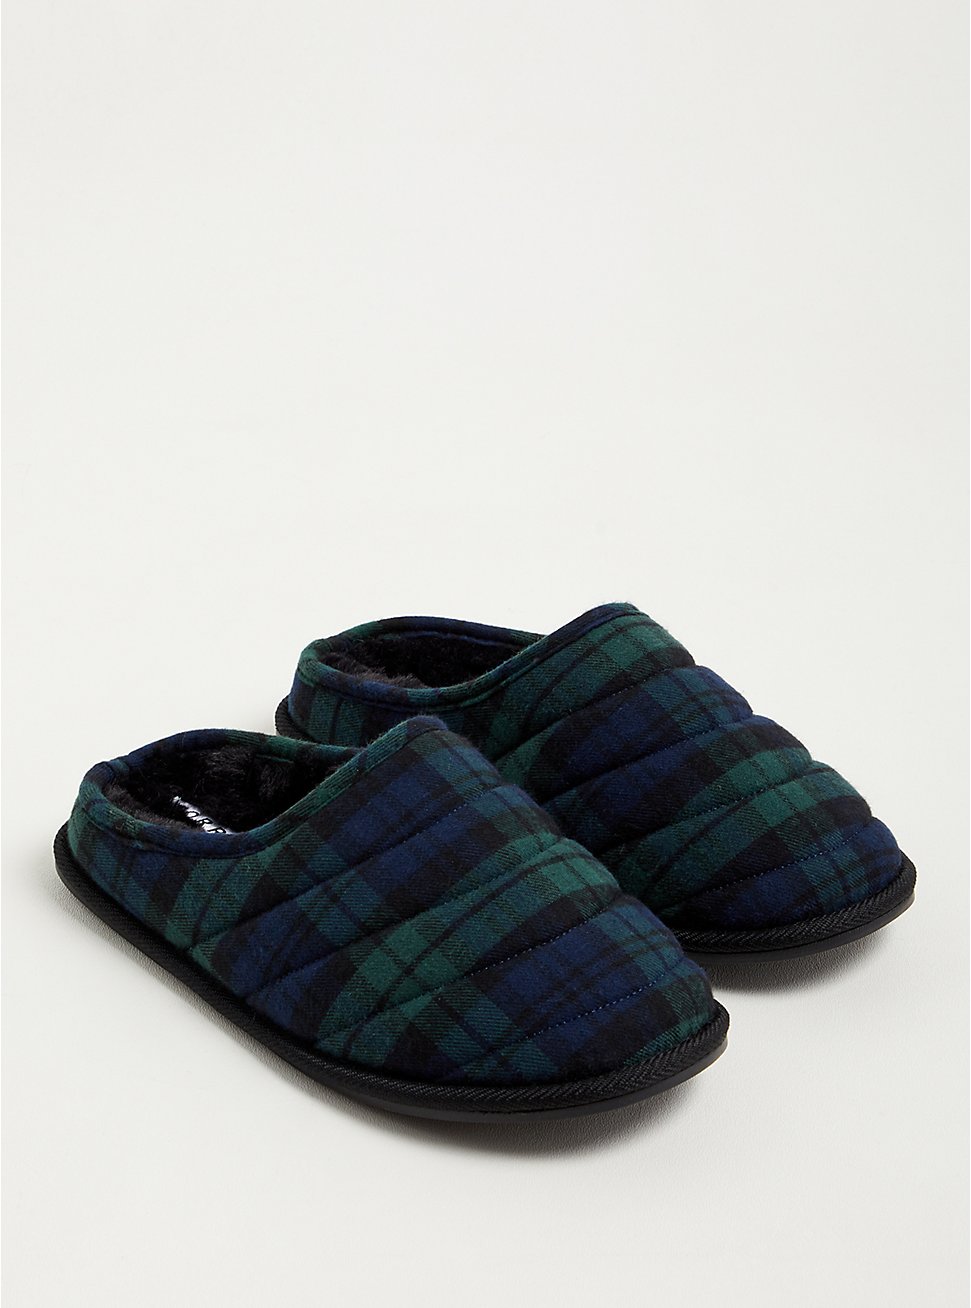 Men's red Chequered footsies slippers